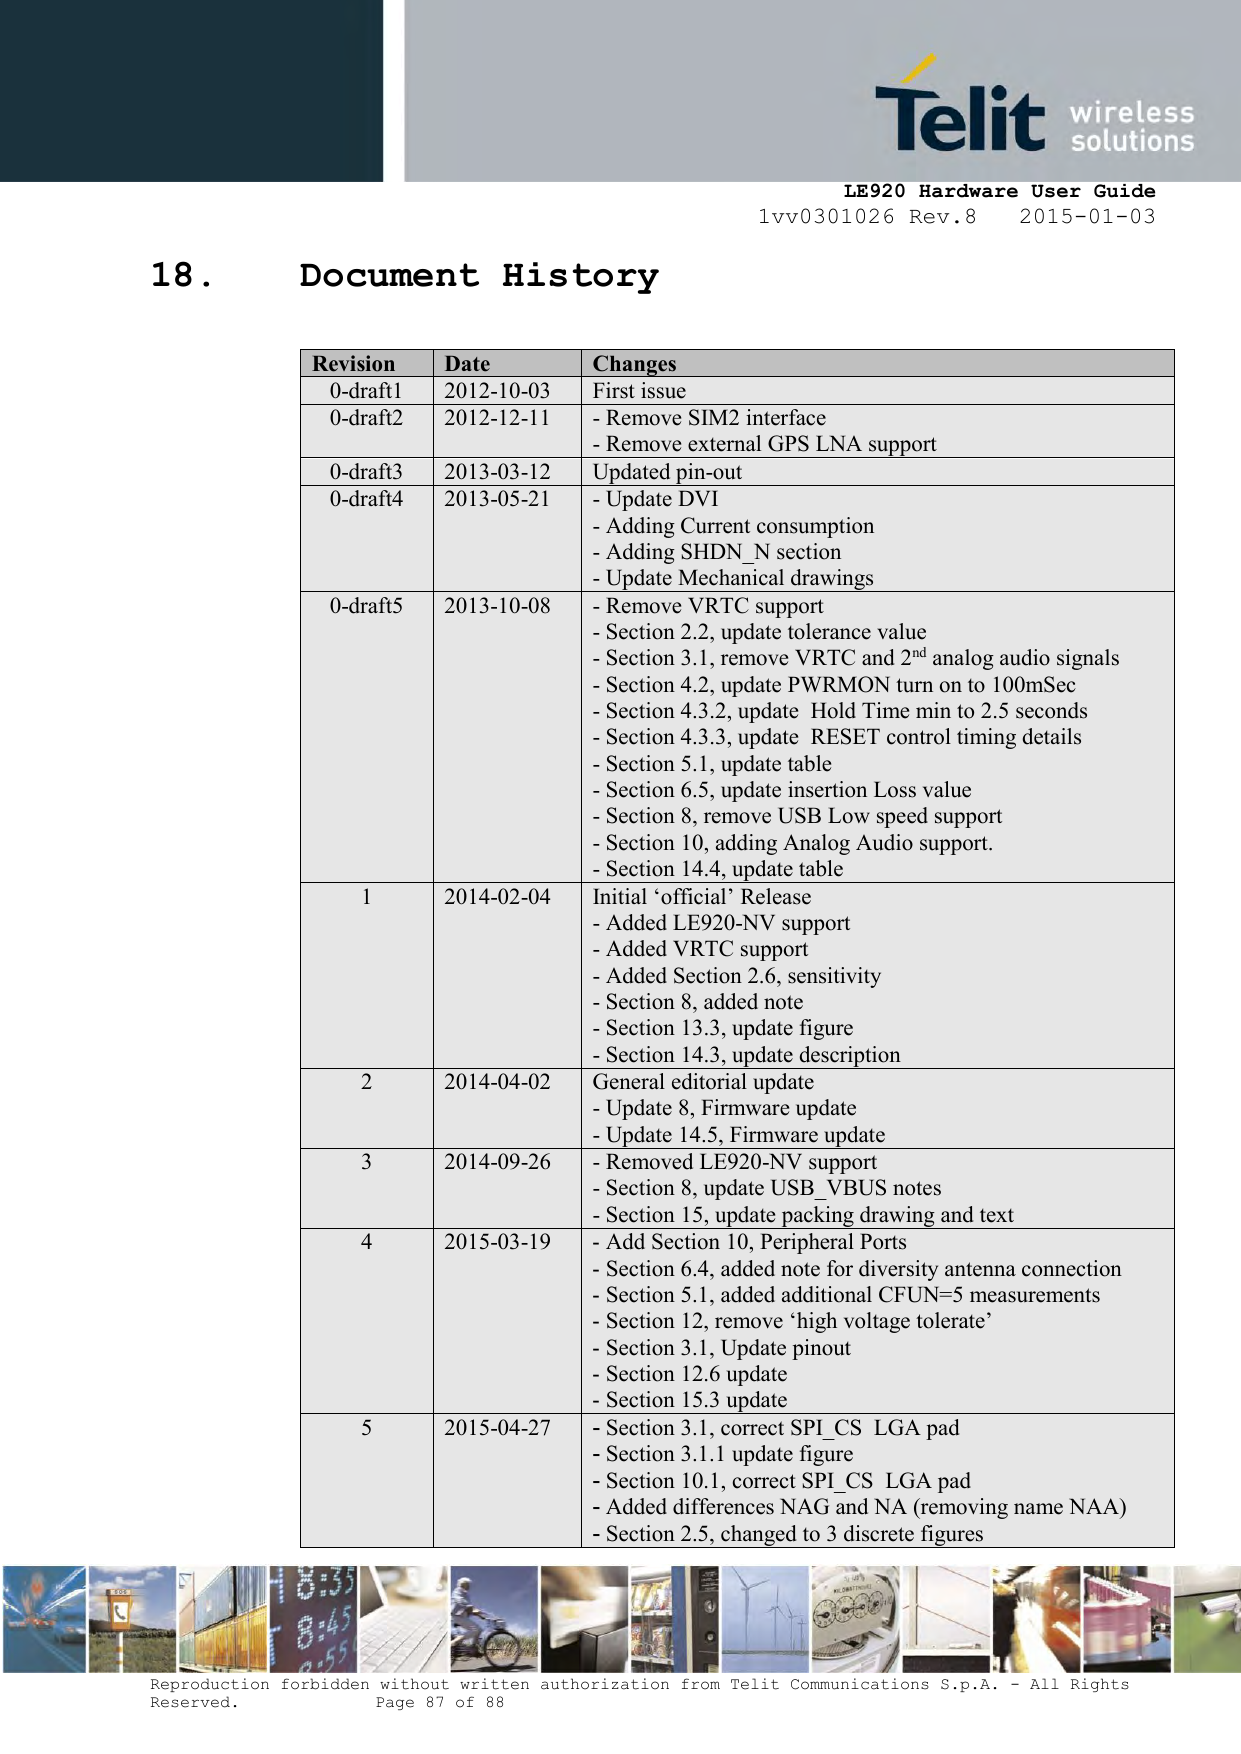     LE920 Hardware User Guide 1vv0301026 Rev.8   2015-01-03 Reproduction forbidden without written authorization from Telit Communications S.p.A. - All Rights Reserved.    Page 87 of 88  18. Document History  Revision Date Changes 0-draft1 2012-10-03 First issue  0-draft2 2012-12-11 - Remove SIM2 interface - Remove external GPS LNA support  0-draft3 2013-03-12 Updated pin-out  0-draft4 2013-05-21 - Update DVI - Adding Current consumption - Adding SHDN_N section - Update Mechanical drawings 0-draft5 2013-10-08 - Remove VRTC support - Section 2.2, update tolerance value - Section 3.1, remove VRTC and 2nd analog audio signals - Section 4.2, update PWRMON turn on to 100mSec - Section 4.3.2, update  Hold Time min to 2.5 seconds - Section 4.3.3, update  RESET control timing details - Section 5.1, update table - Section 6.5, update insertion Loss value - Section 8, remove USB Low speed support - Section 10, adding Analog Audio support. - Section 14.4, update table 1 2014-02-04 Initial ‘official’ Release  - Added LE920-NV support - Added VRTC support - Added Section 2.6, sensitivity - Section 8, added note - Section 13.3, update figure - Section 14.3, update description 2 2014-04-02 General editorial update - Update 8, Firmware update - Update 14.5, Firmware update 3 2014-09-26 - Removed LE920-NV support - Section 8, update USB_VBUS notes - Section 15, update packing drawing and text 4 2015-03-19 - Add Section 10, Peripheral Ports - Section 6.4, added note for diversity antenna connection - Section 5.1, added additional CFUN=5 measurements - Section 12, remove ‘high voltage tolerate’ - Section 3.1, Update pinout - Section 12.6 update  - Section 15.3 update 5 2015-04-27 - Section 3.1, correct SPI_CS  LGA pad - Section 3.1.1 update figure  - Section 10.1, correct SPI_CS  LGA pad - Added differences NAG and NA (removing name NAA) - Section 2.5, changed to 3 discrete figures 